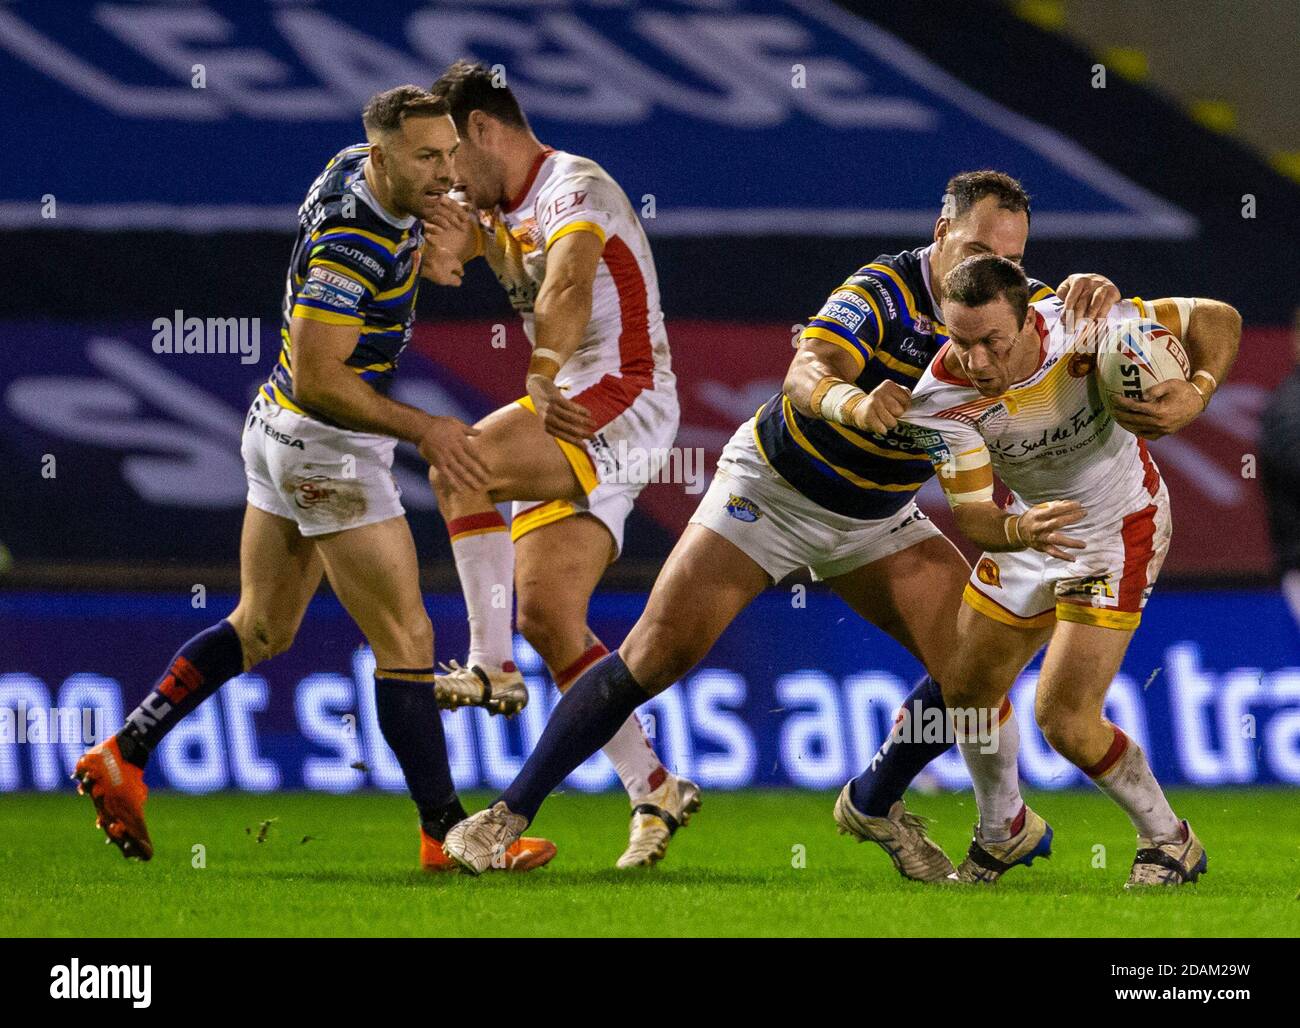 13th November 2020; The Halliwell Jones Stadium, Warrington, Cheshire, England; Betfred Rugby League Playoffs, Catalan Dragons versus Leeds Rhinos; James Maloney of Catalans Dragons is tackled Stock Photo